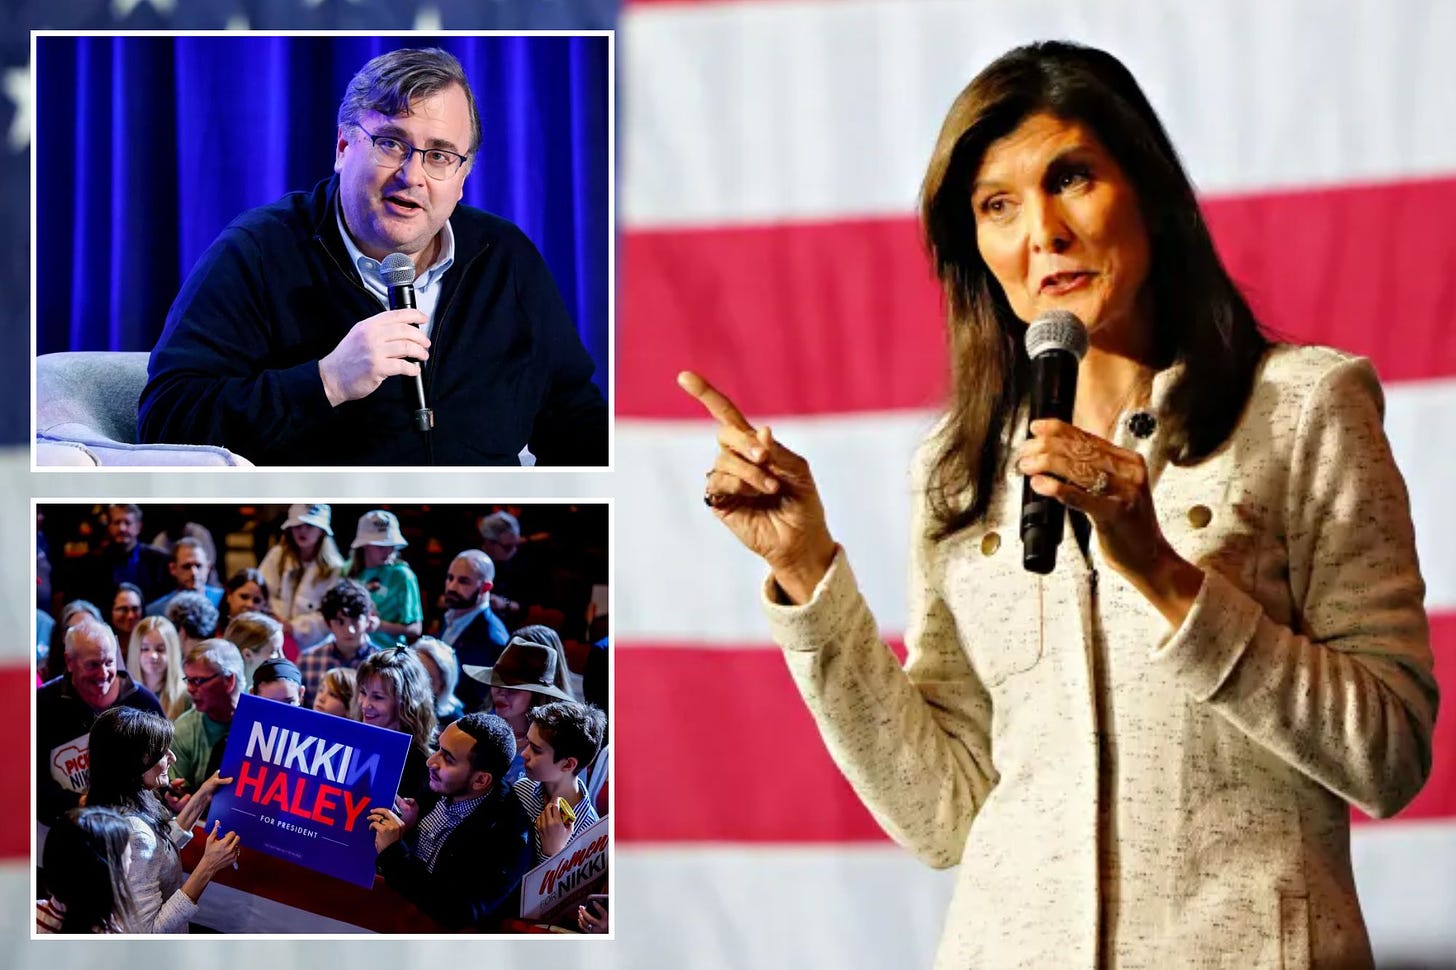 LinkedIn's Reid Hoffman won't give to Nikki Haley without 'path to victory'